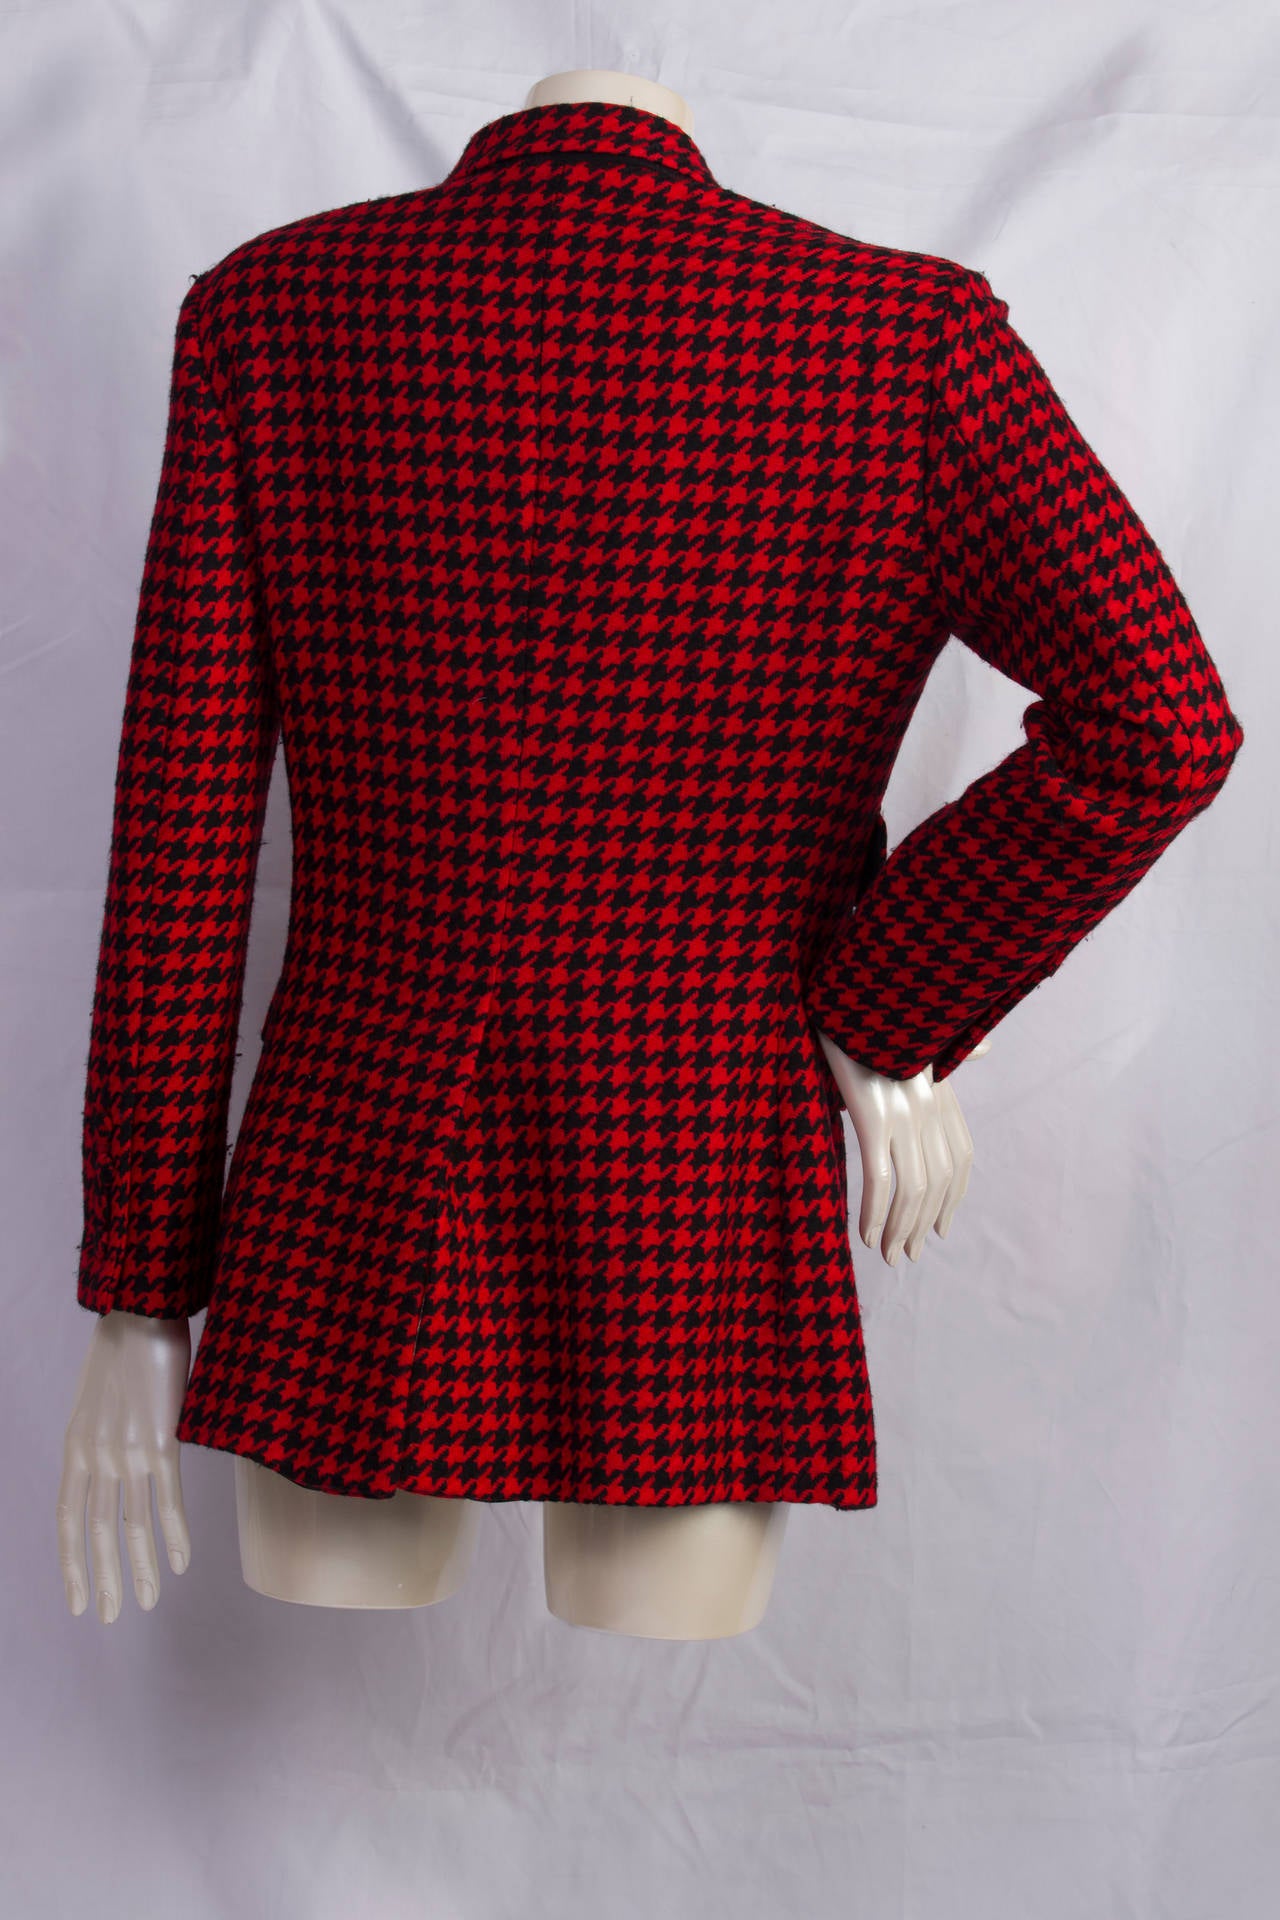 1980s Moschino Couture Pied de Poule red and black jacket In New Condition For Sale In Capri, IT